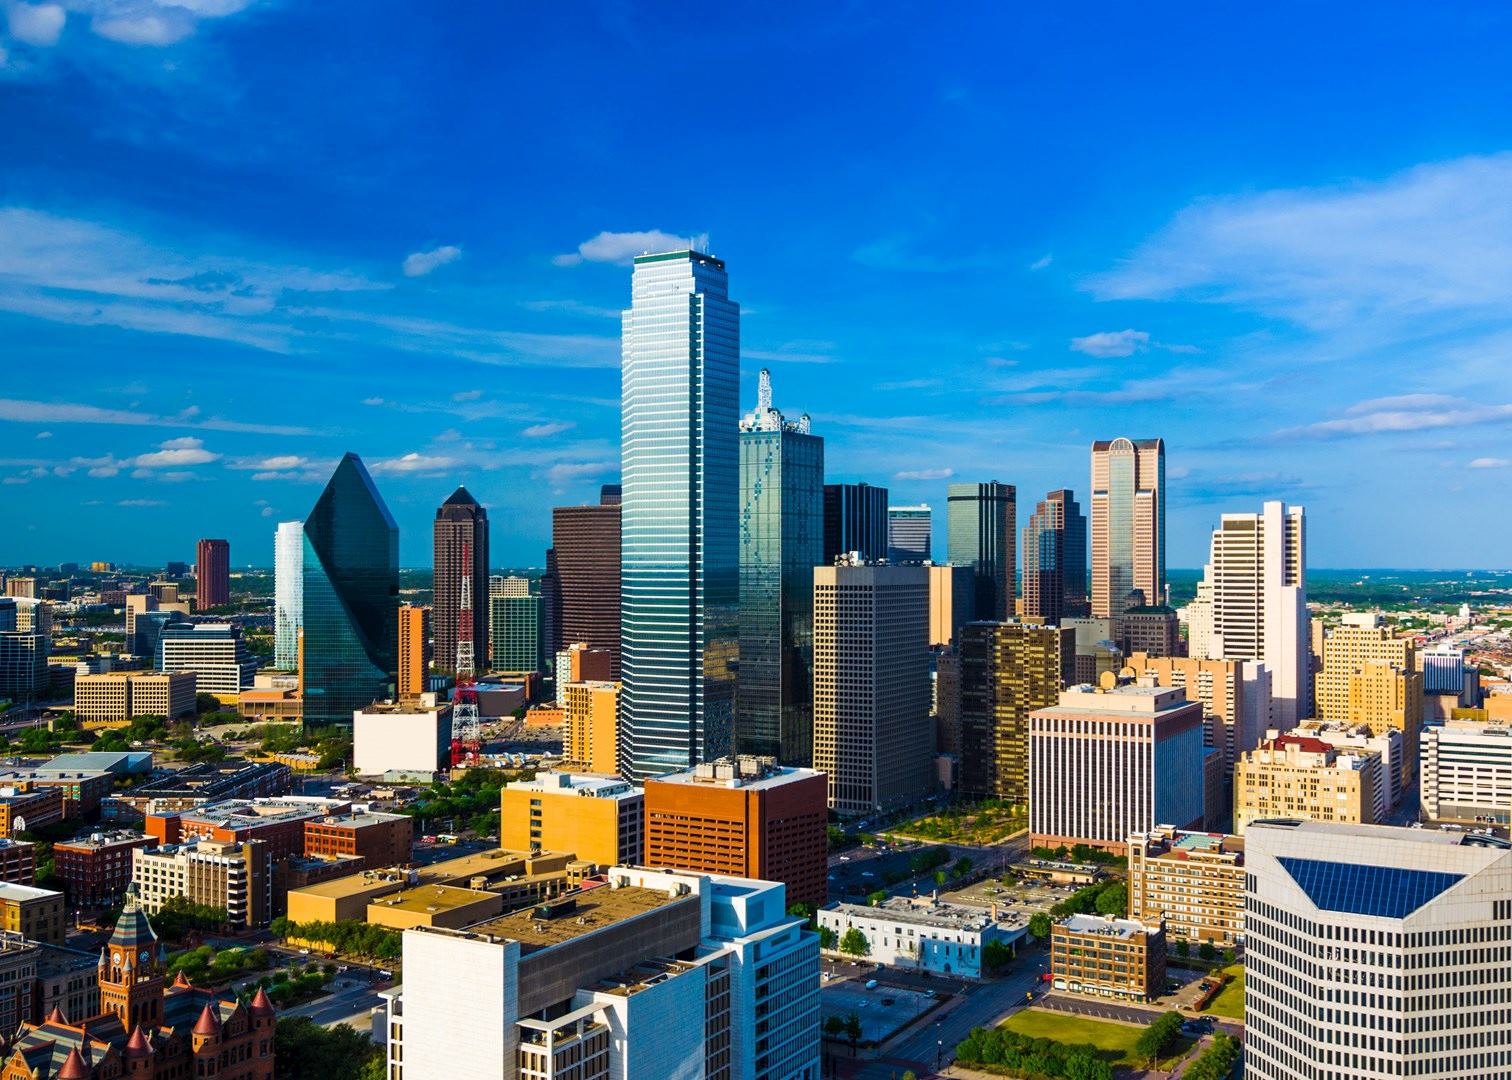 Visit Dallas on a trip to The USA | Audley Travel